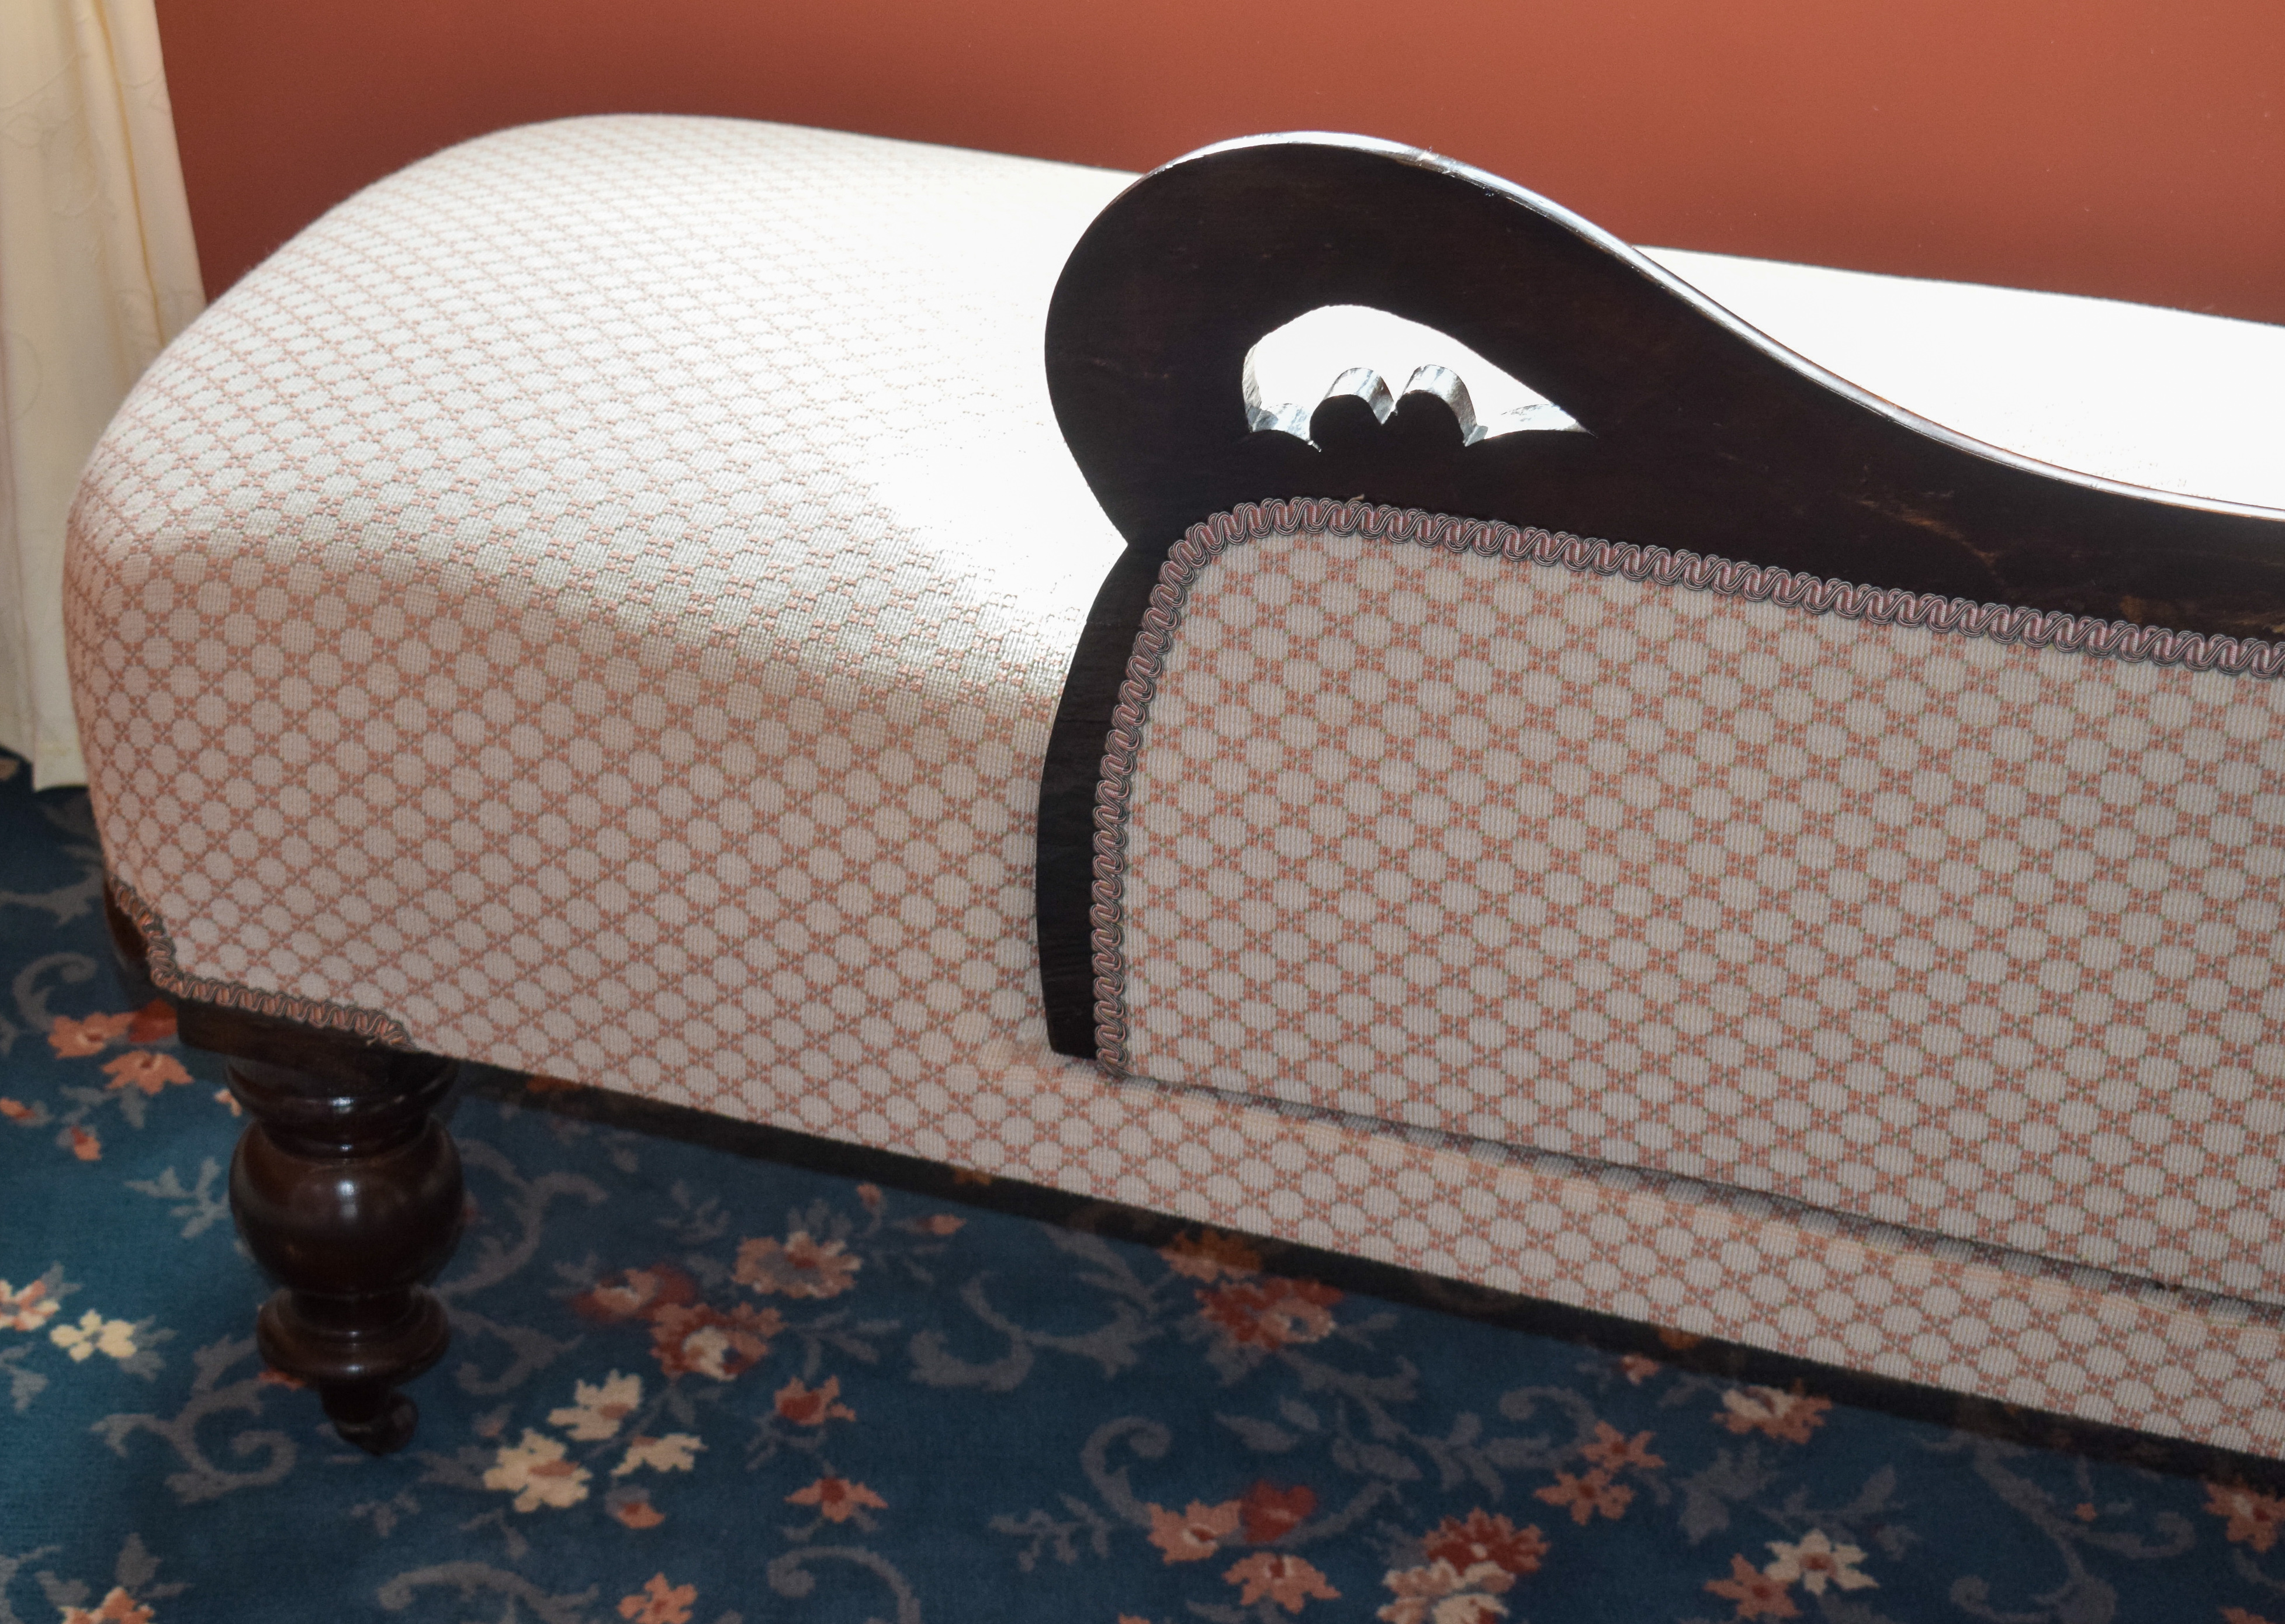 AN ANTIQUE CHAISE LOUNGE, honeycomb type upholstery. 80 cm x 190 cm. - Image 5 of 6